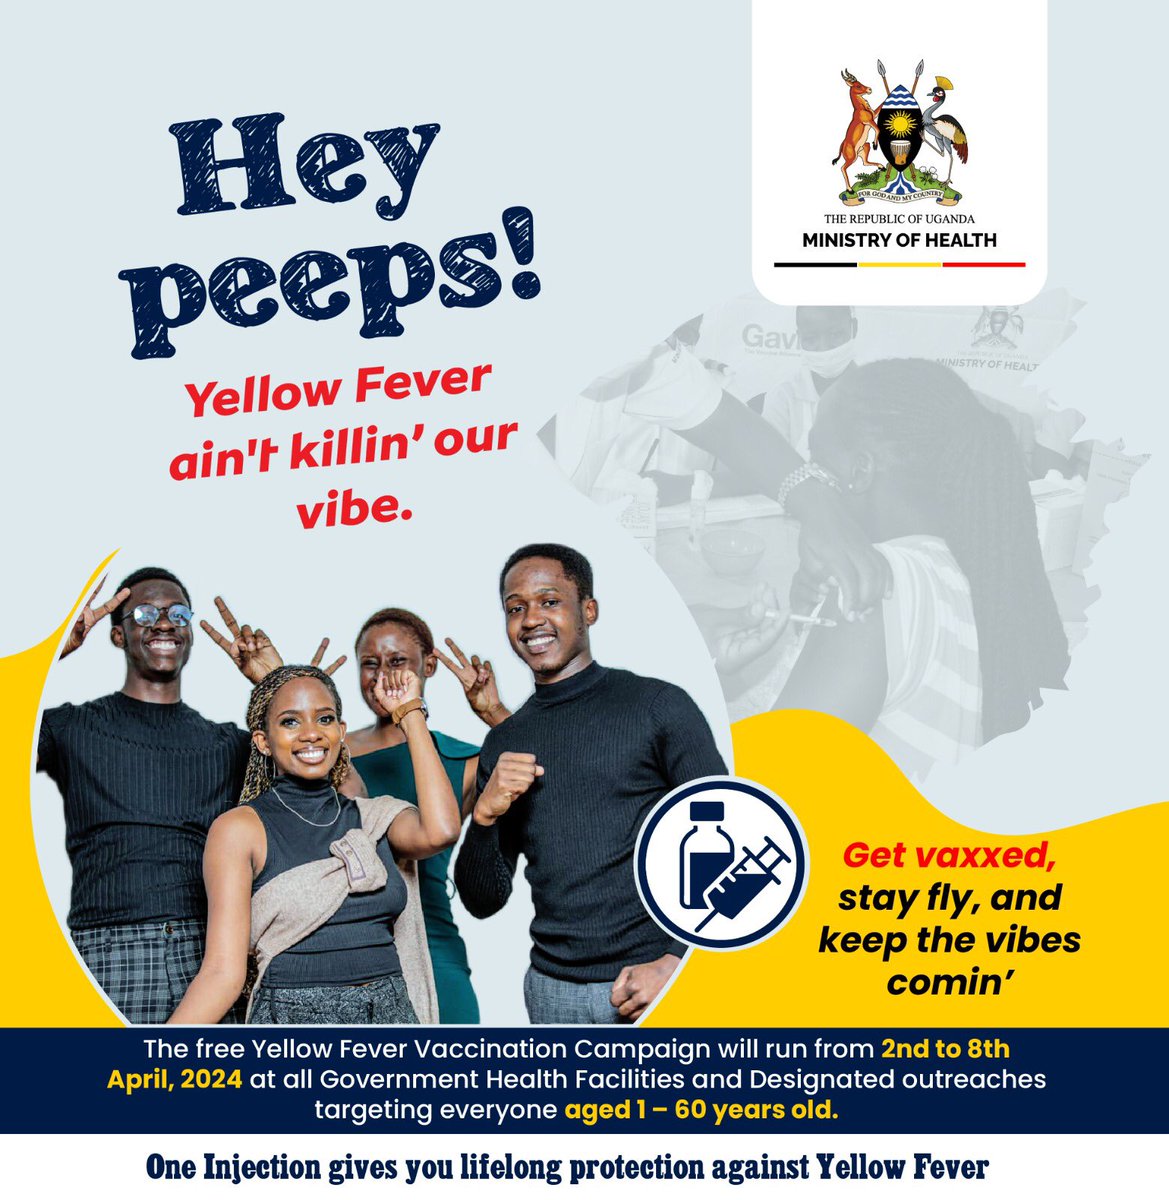 Previously, the yellow fever vaccine was only available on a paid basis through private health providers and deployed principally for travellers but now it will be accessible at no cost for all citizens during the #YellowFeverFreeUG mass immunization exercise happening next week.